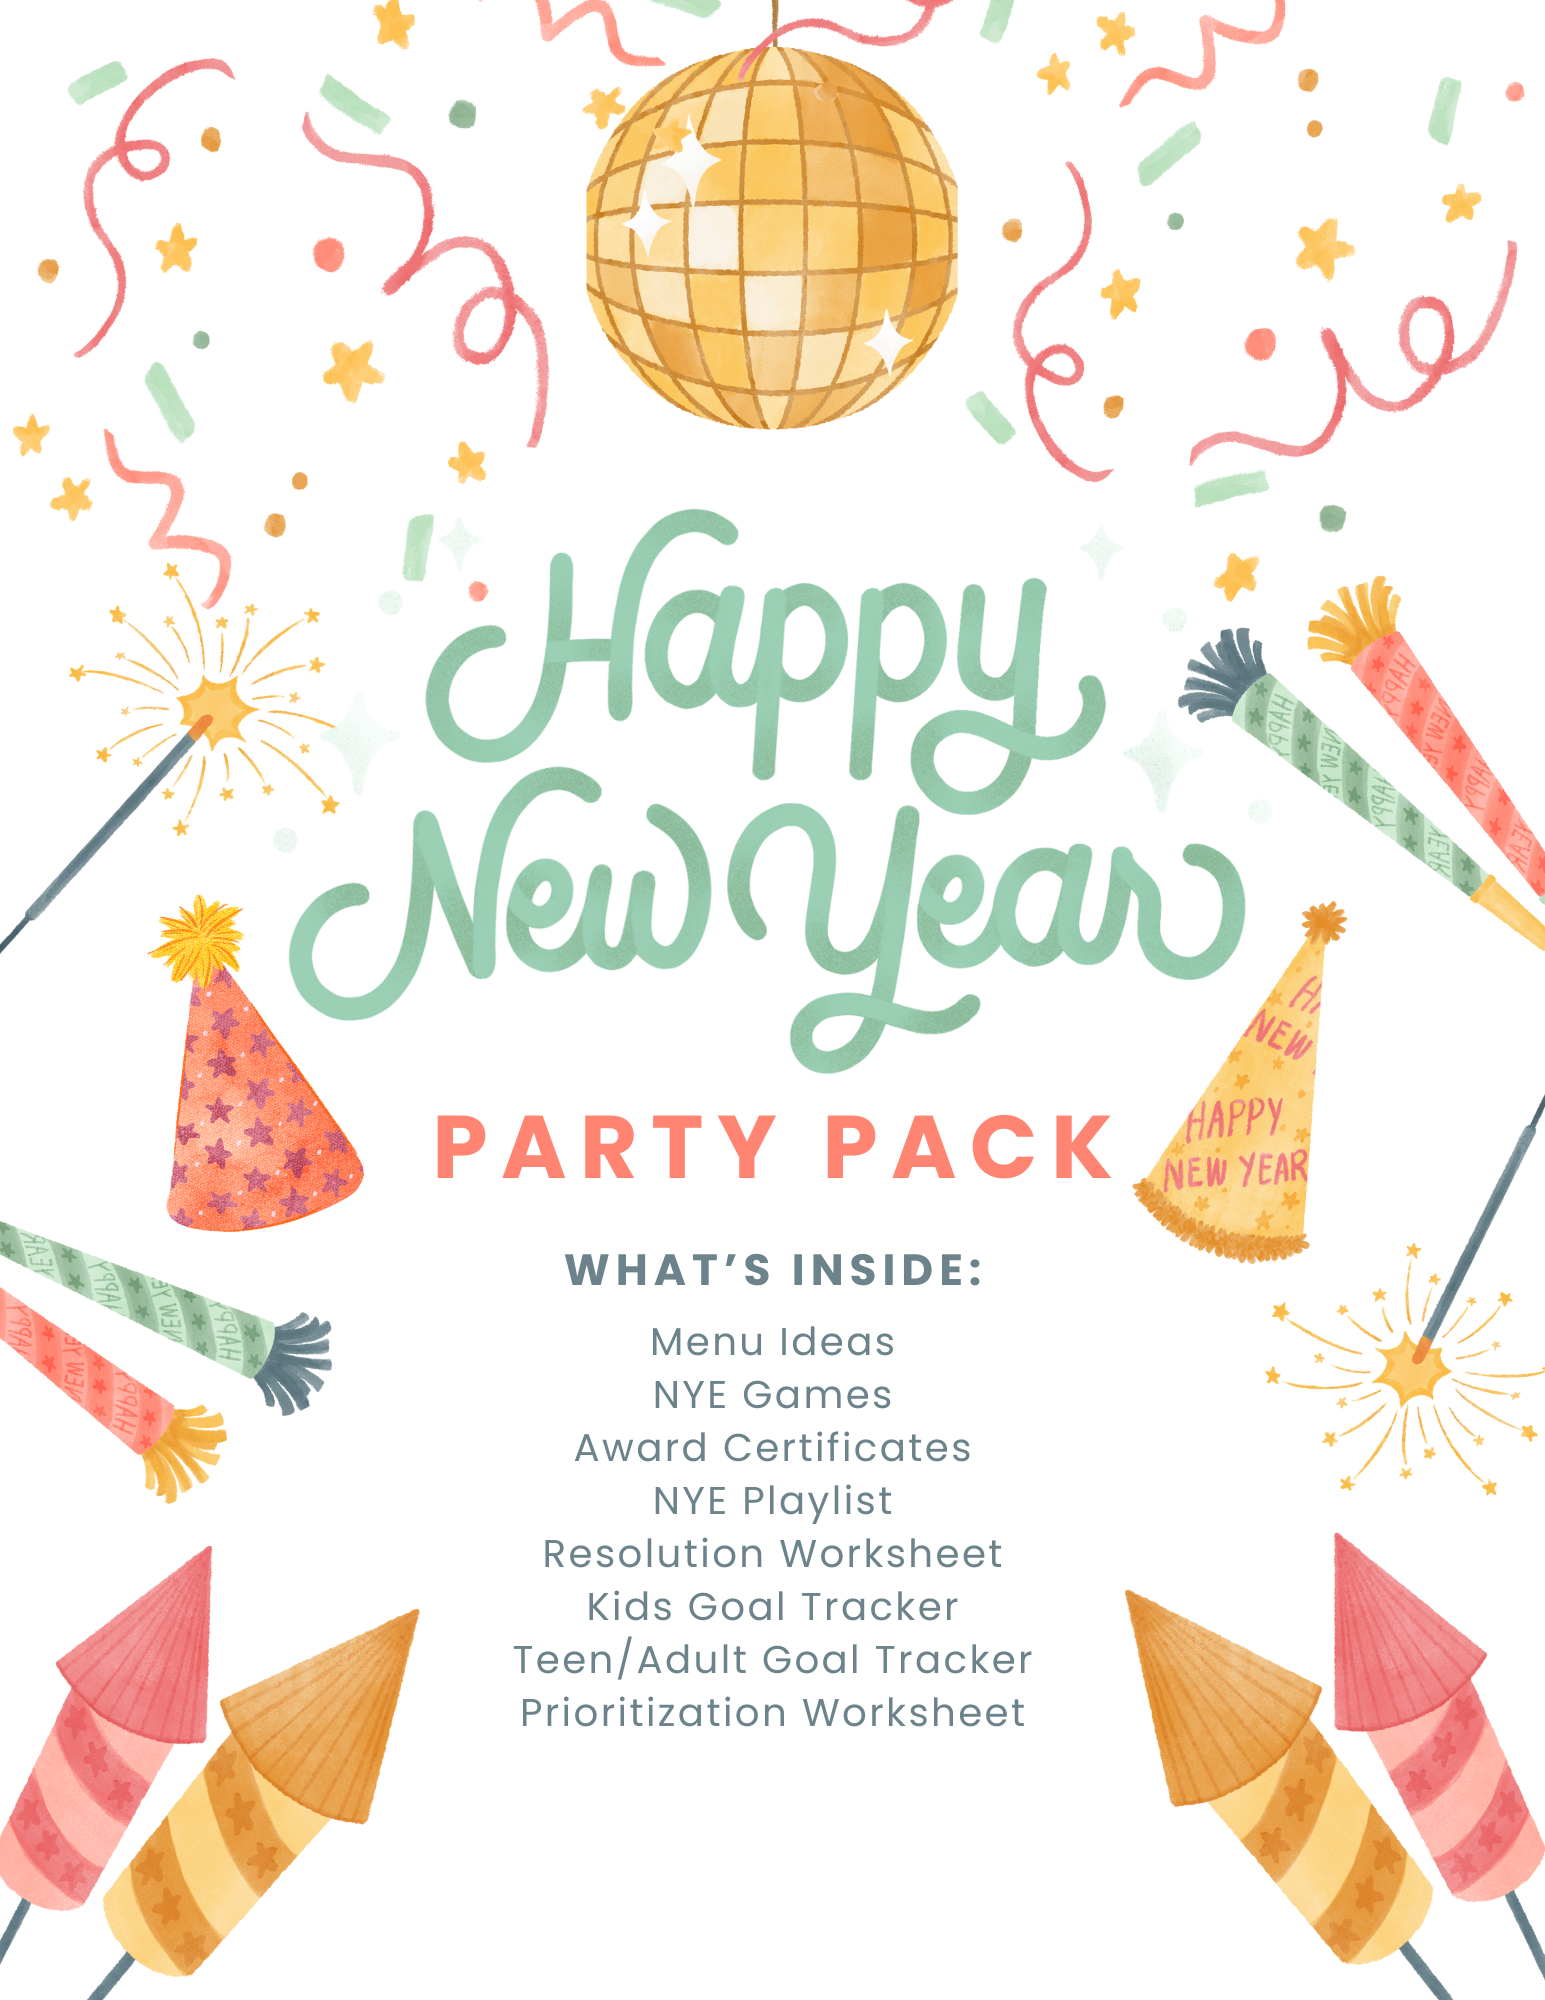 New Year's Eve Party Pack